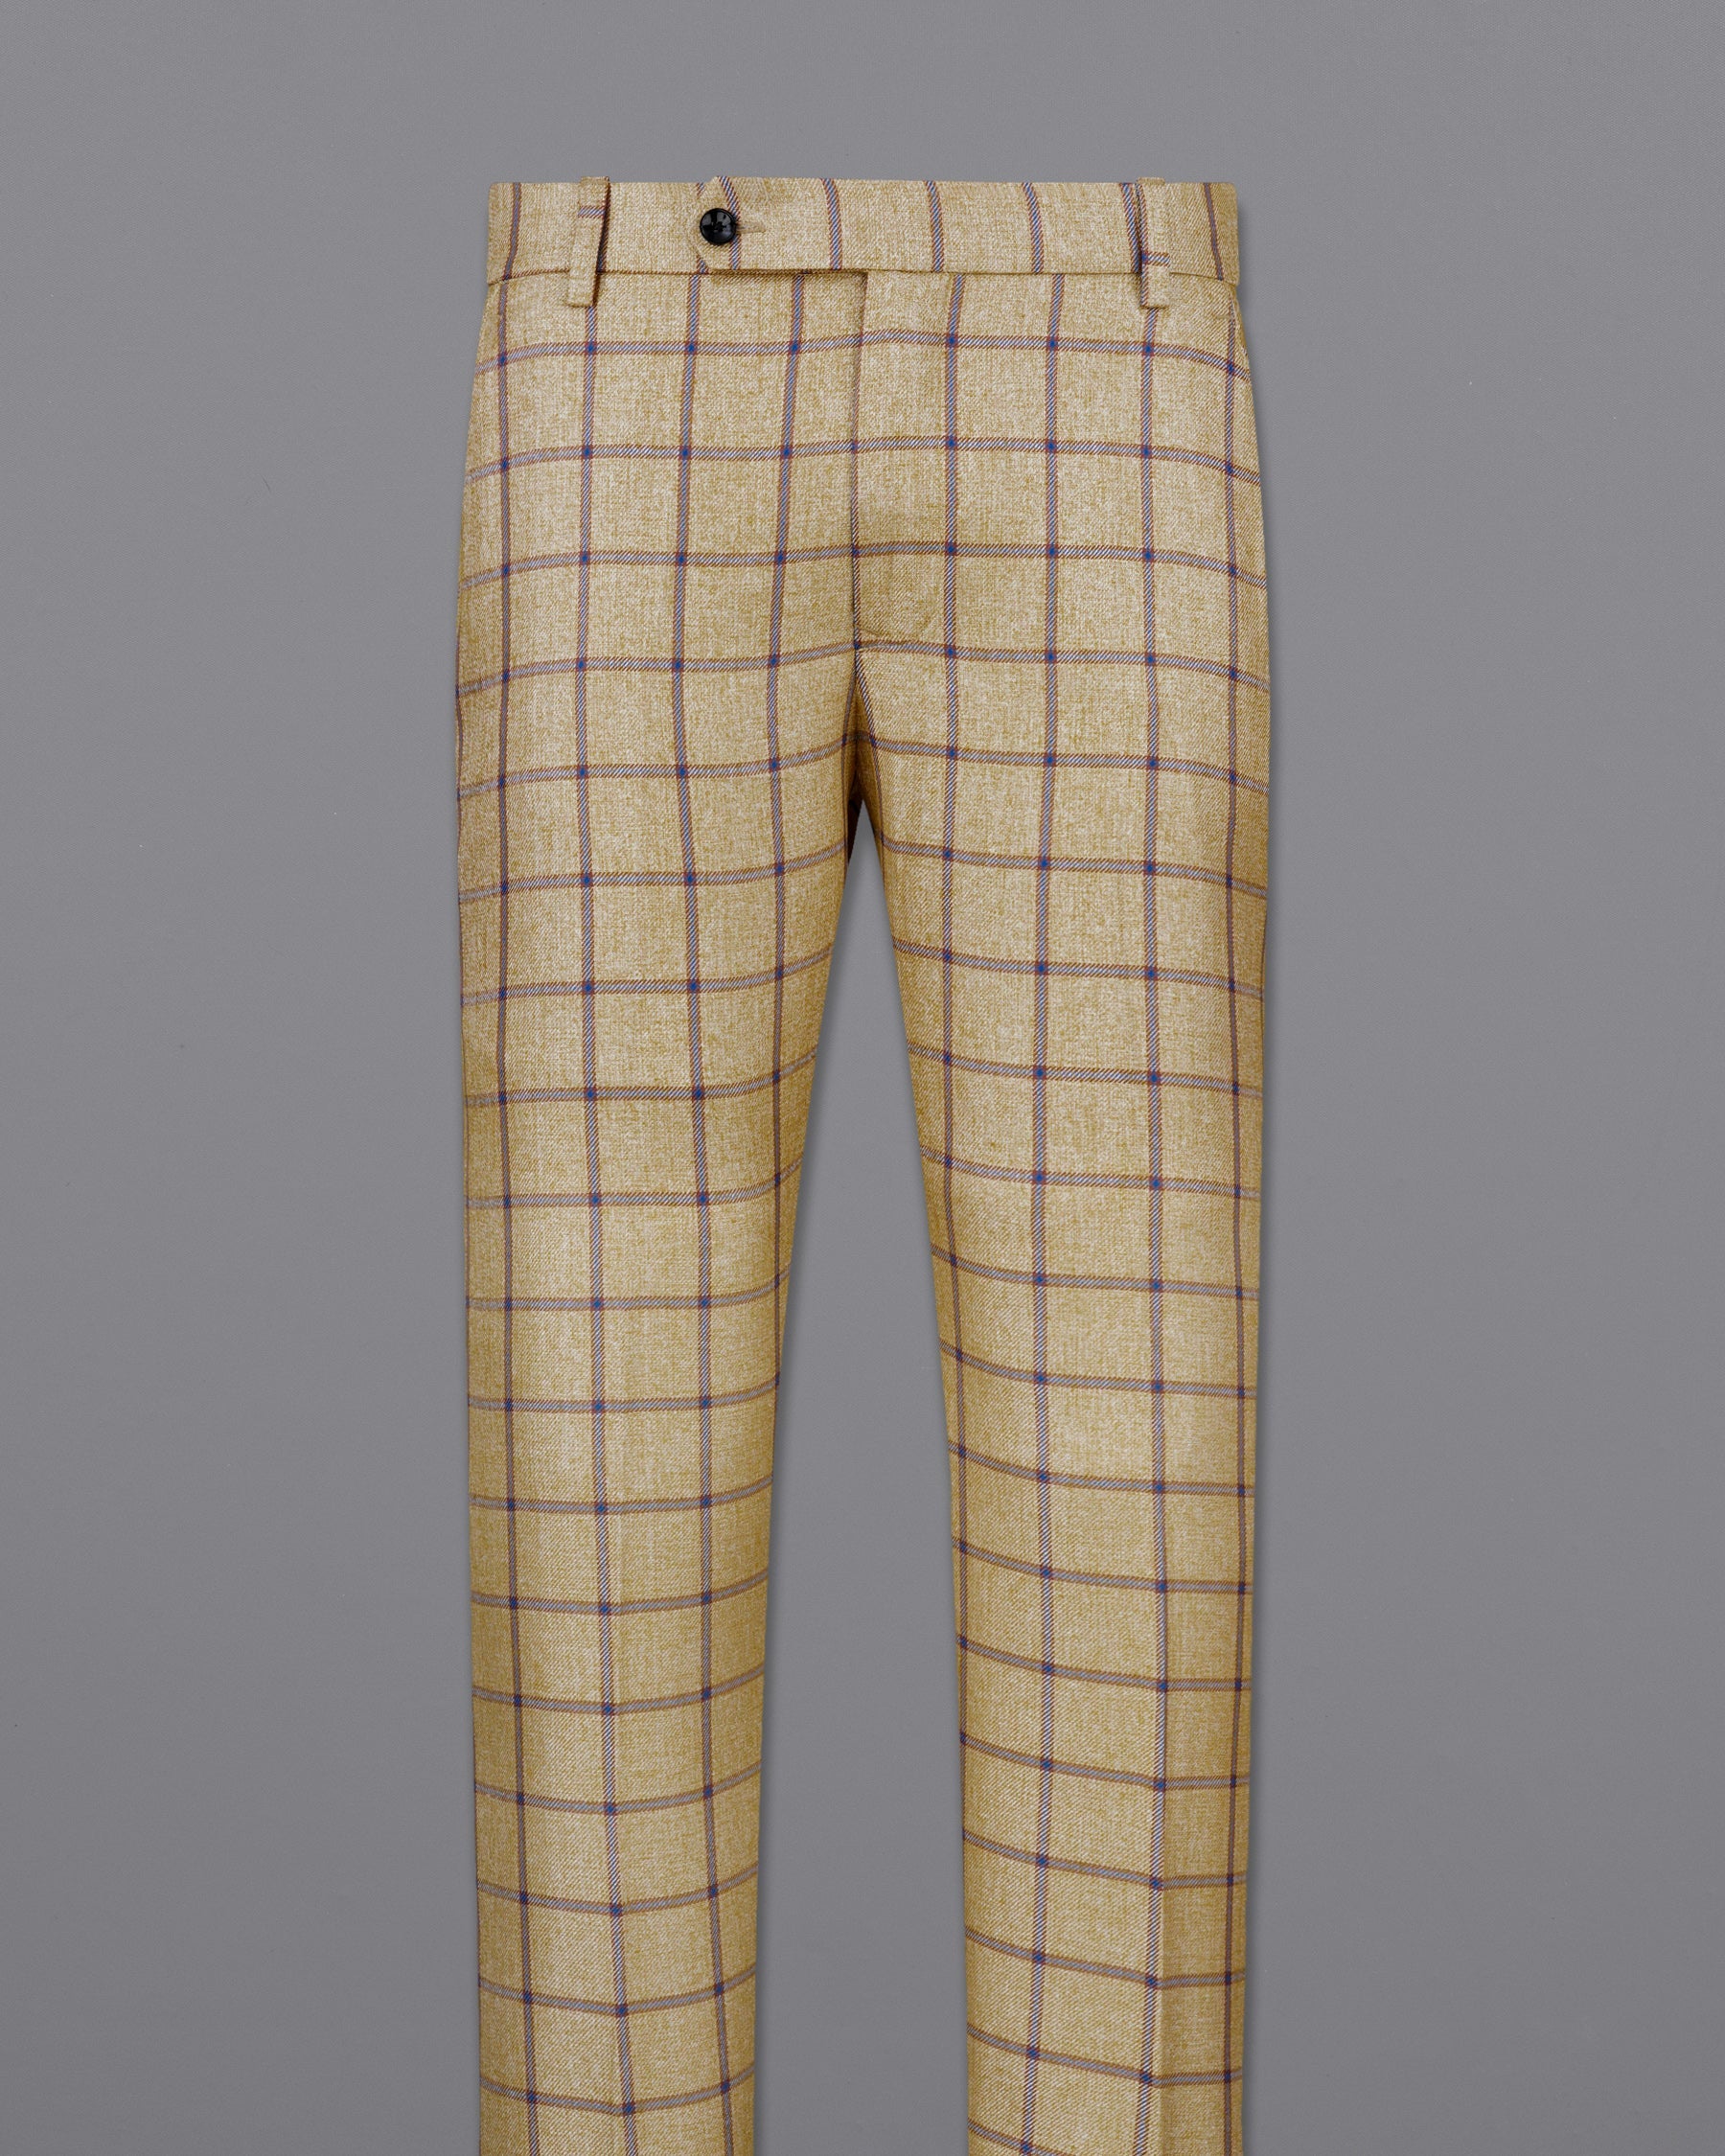 Mongoose Brown with Dianne Blue Windowpane Pant T2137-28, T2137-30, T2137-32, T2137-34, T2137-36, T2137-38, T2137-40, T2137-42, T2137-44